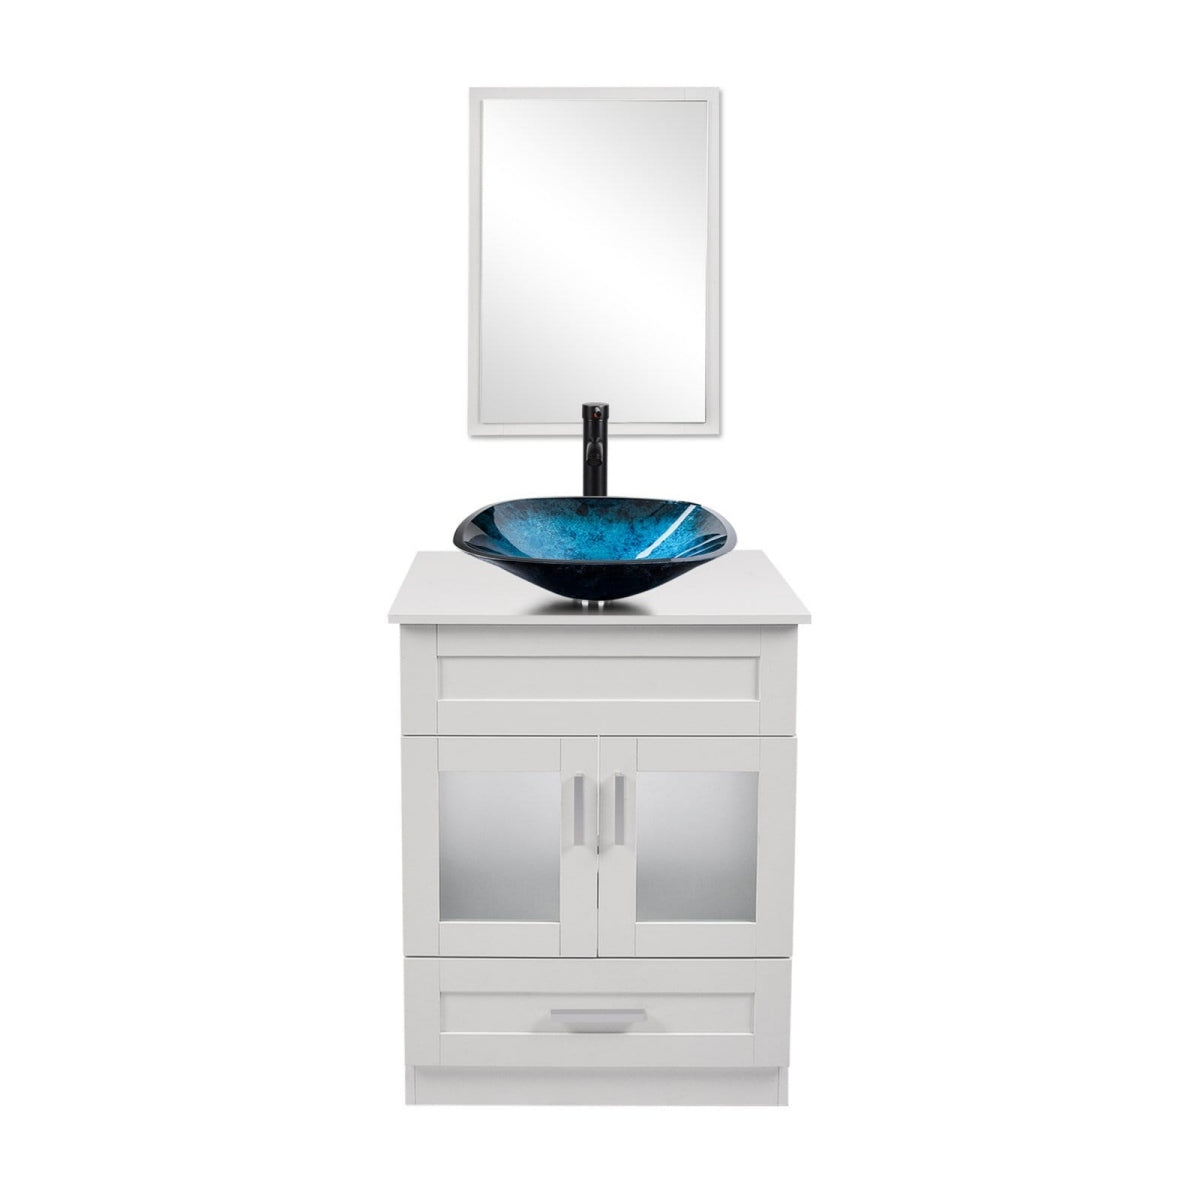 Elecwish White Bathroom Vanity with Blue Square Sink Set BA1001-WH